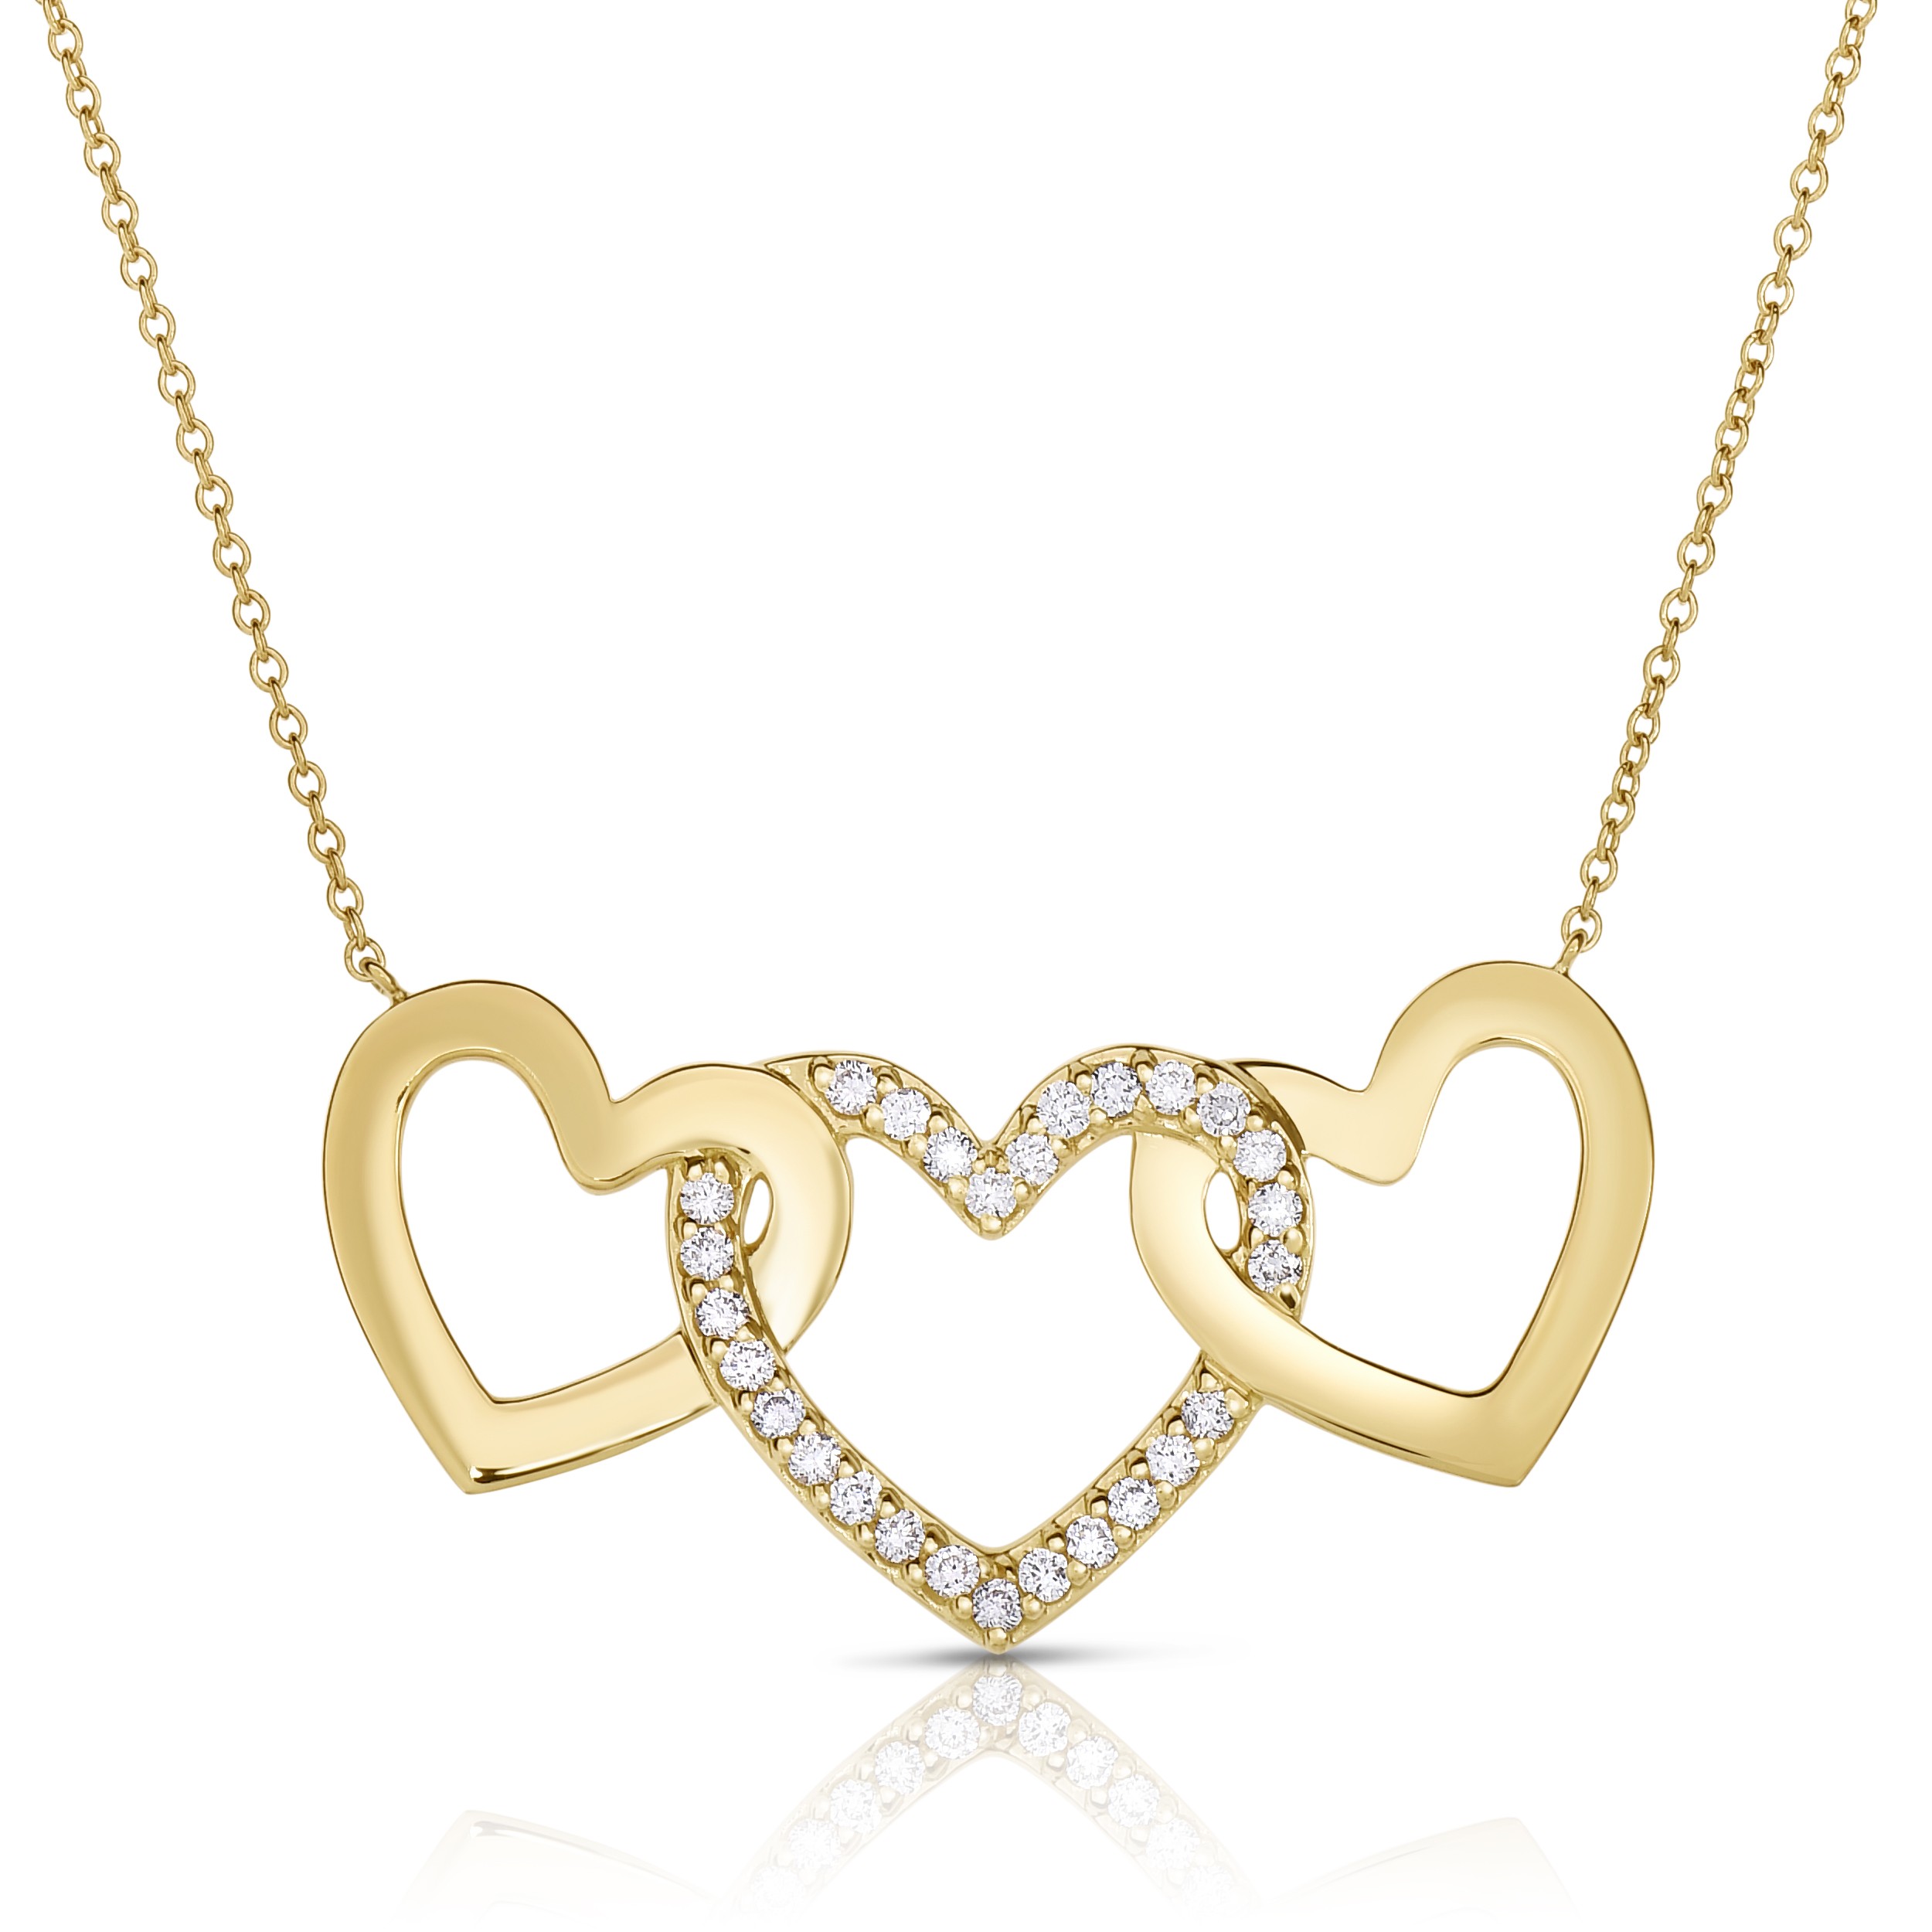 18K Yellow Gold 3 Hearts Love Bonds Pendant with Lab-Grown Diamonds on AIDIA Extendable Link Chain